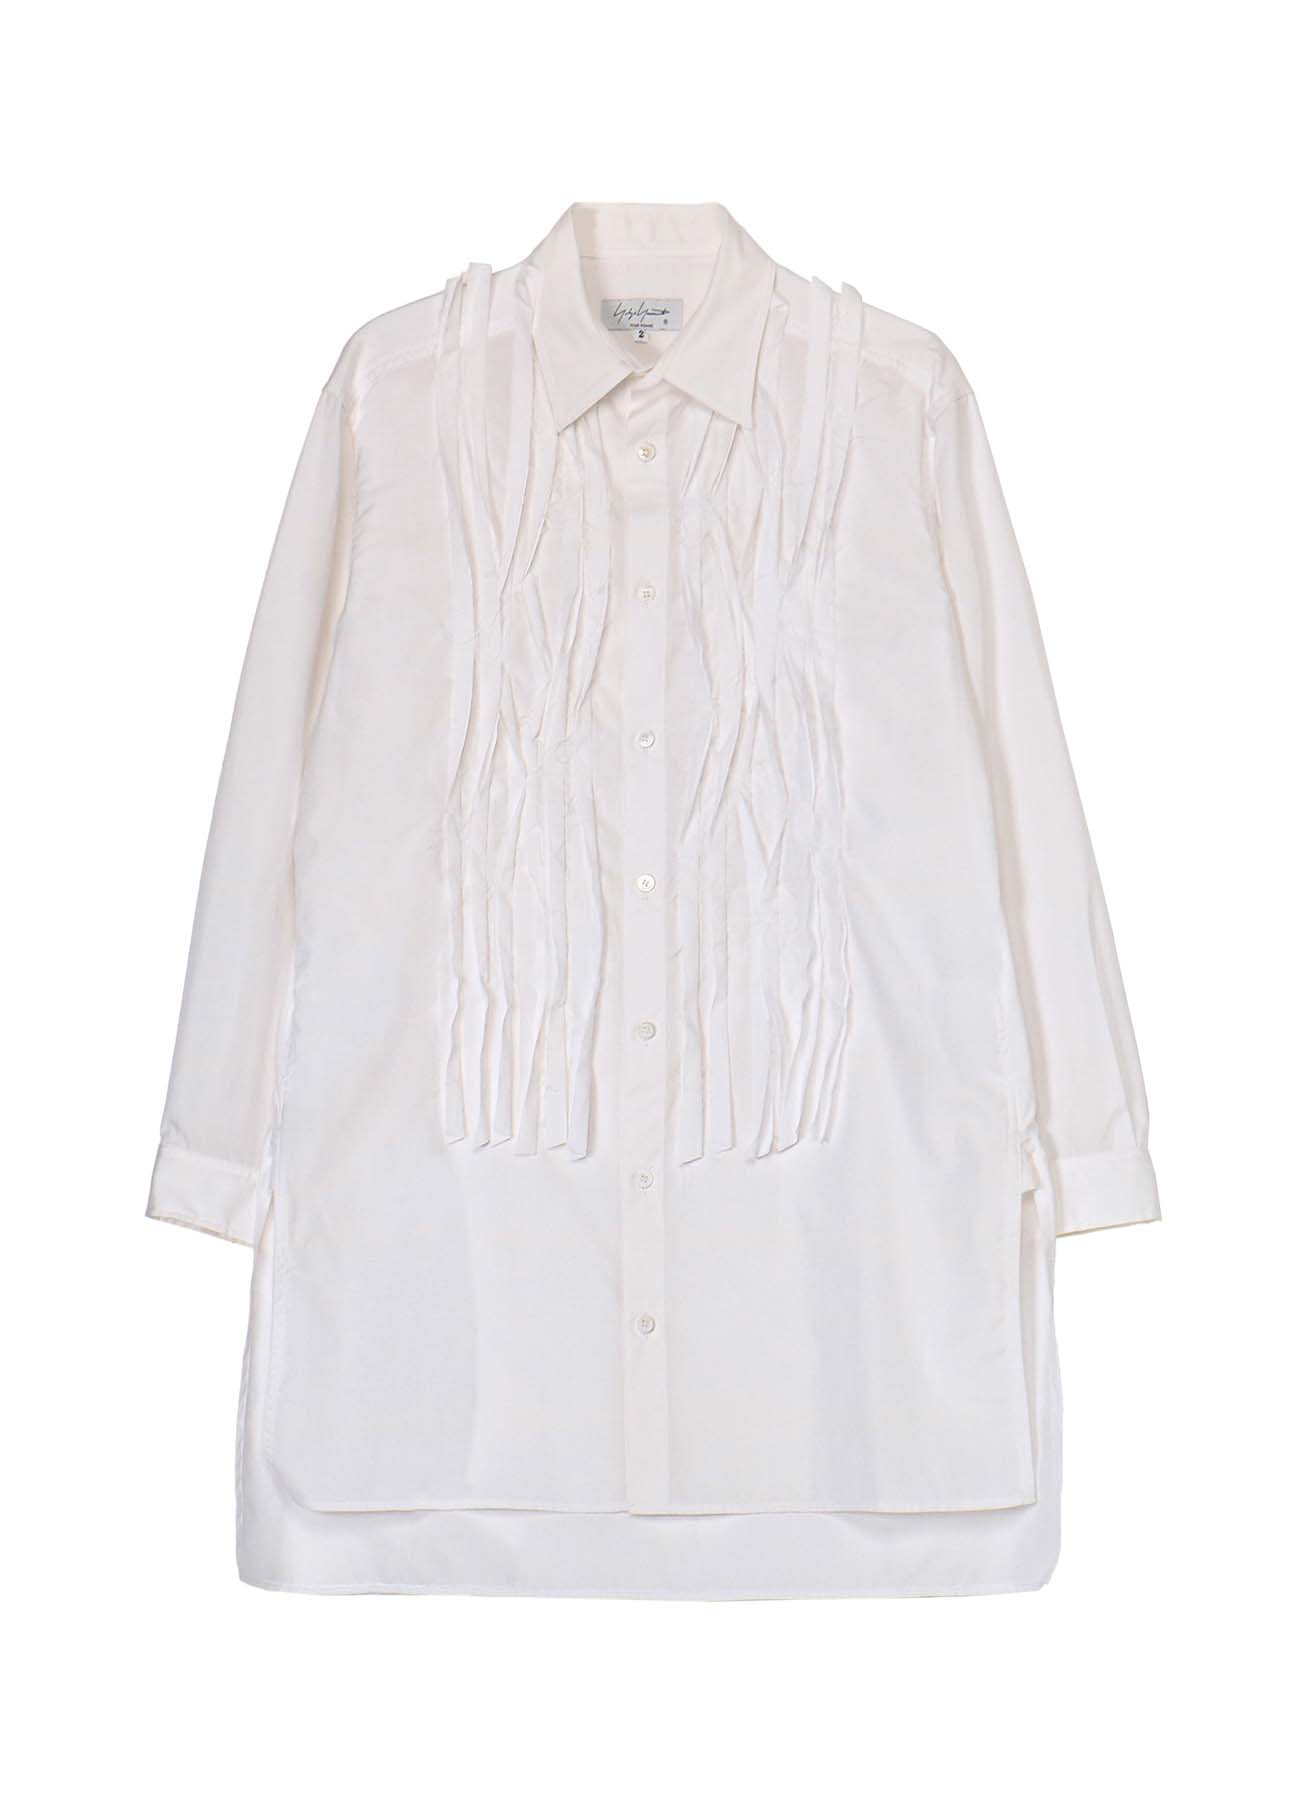 BROAD CHAIN STITCH BLOUSE WITH CLOTH